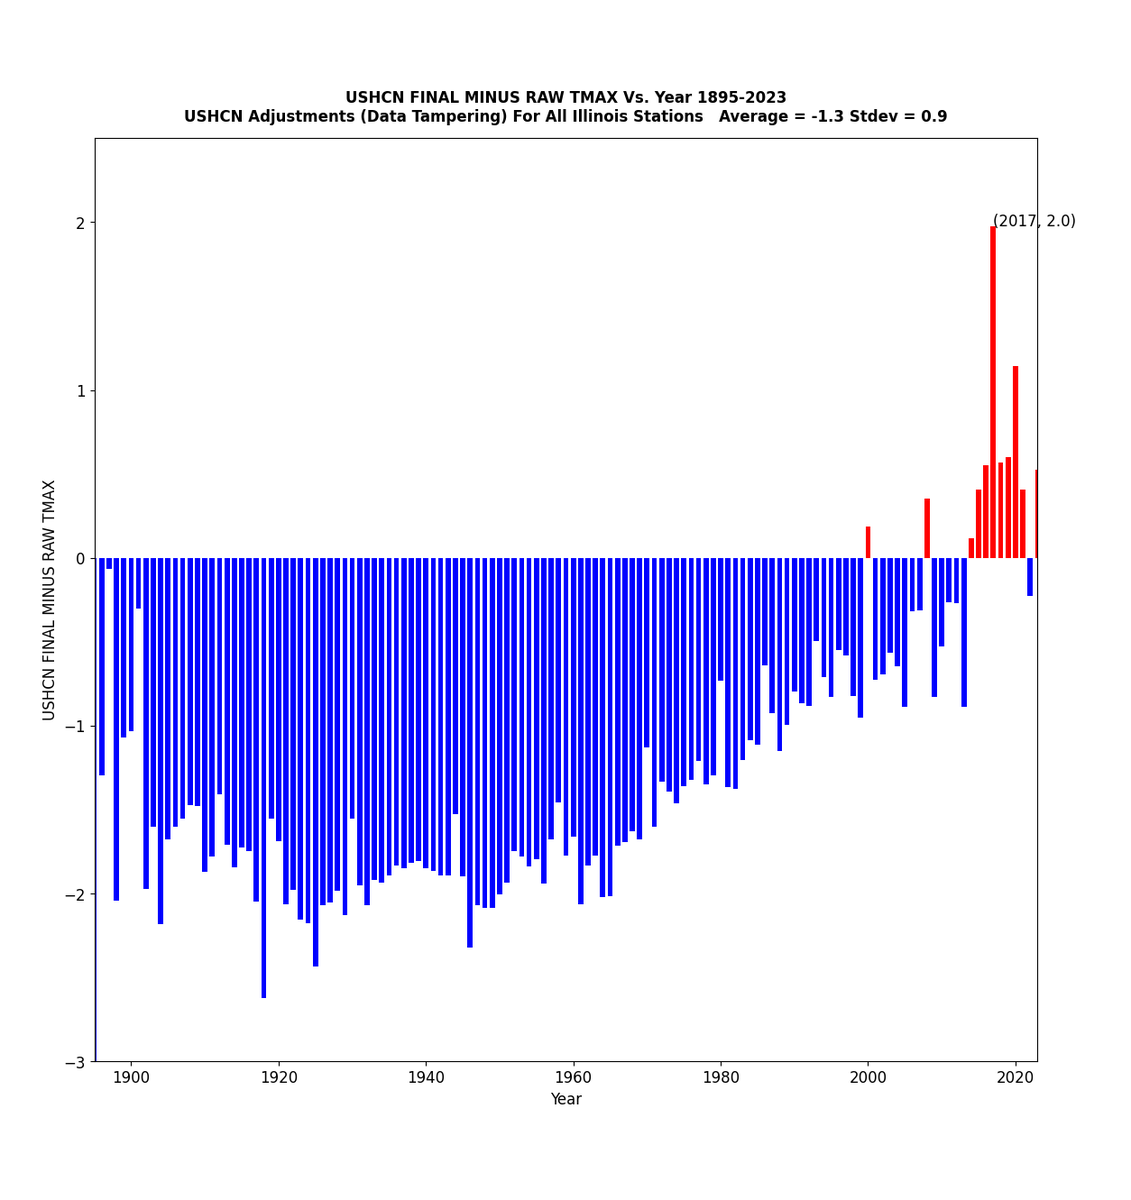 The US isn't warming, but the US government has a warming agenda. So government agencies @NOAA and @NASA tamper with data to create the appearance of a warming trend. Older temperatures are cooled, and recent temperatures are warmed. The #ClimateScam has nothing to do with